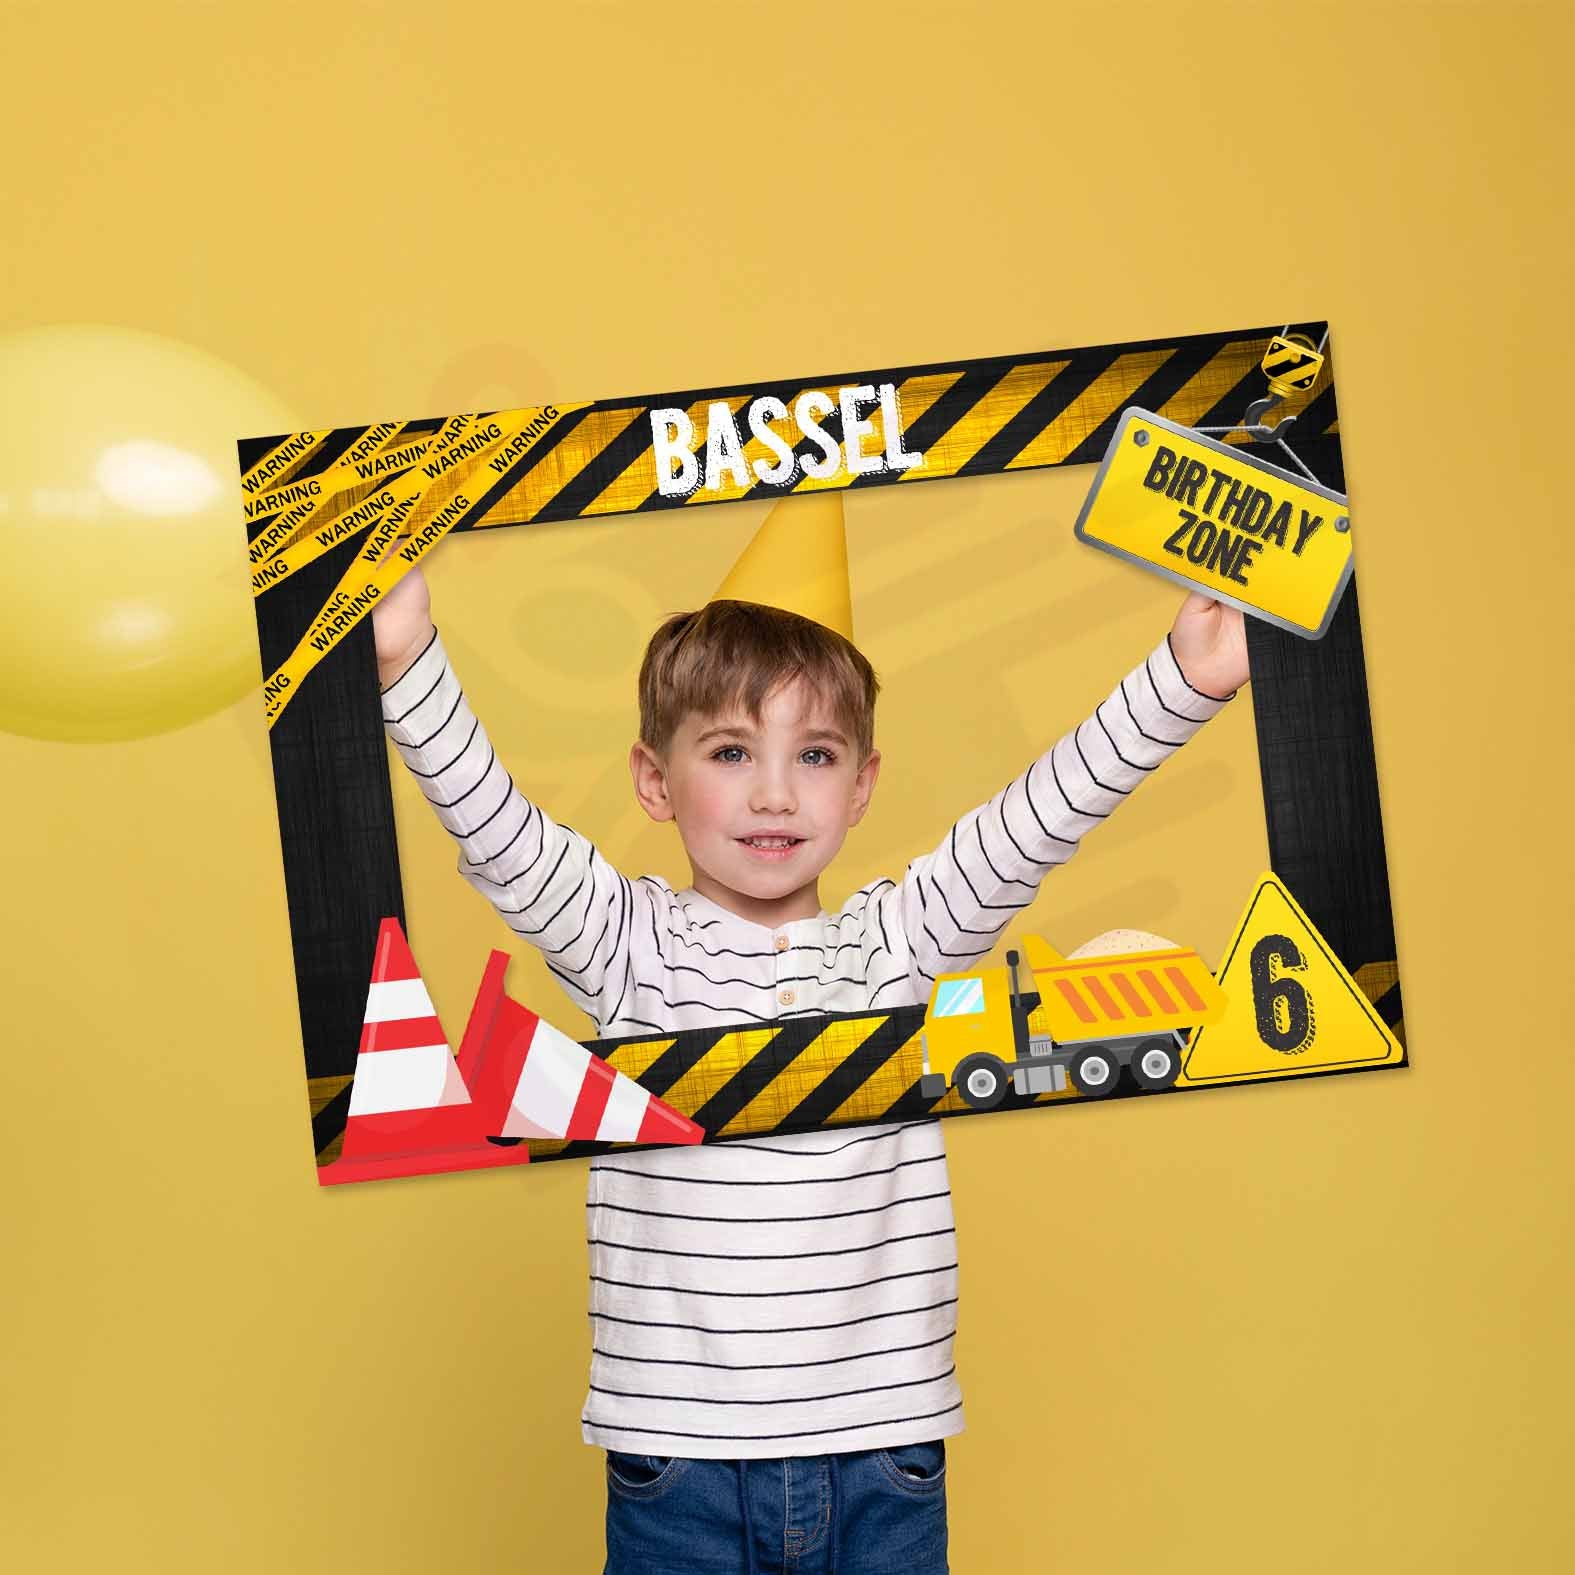 Construction Zone Photo Booth